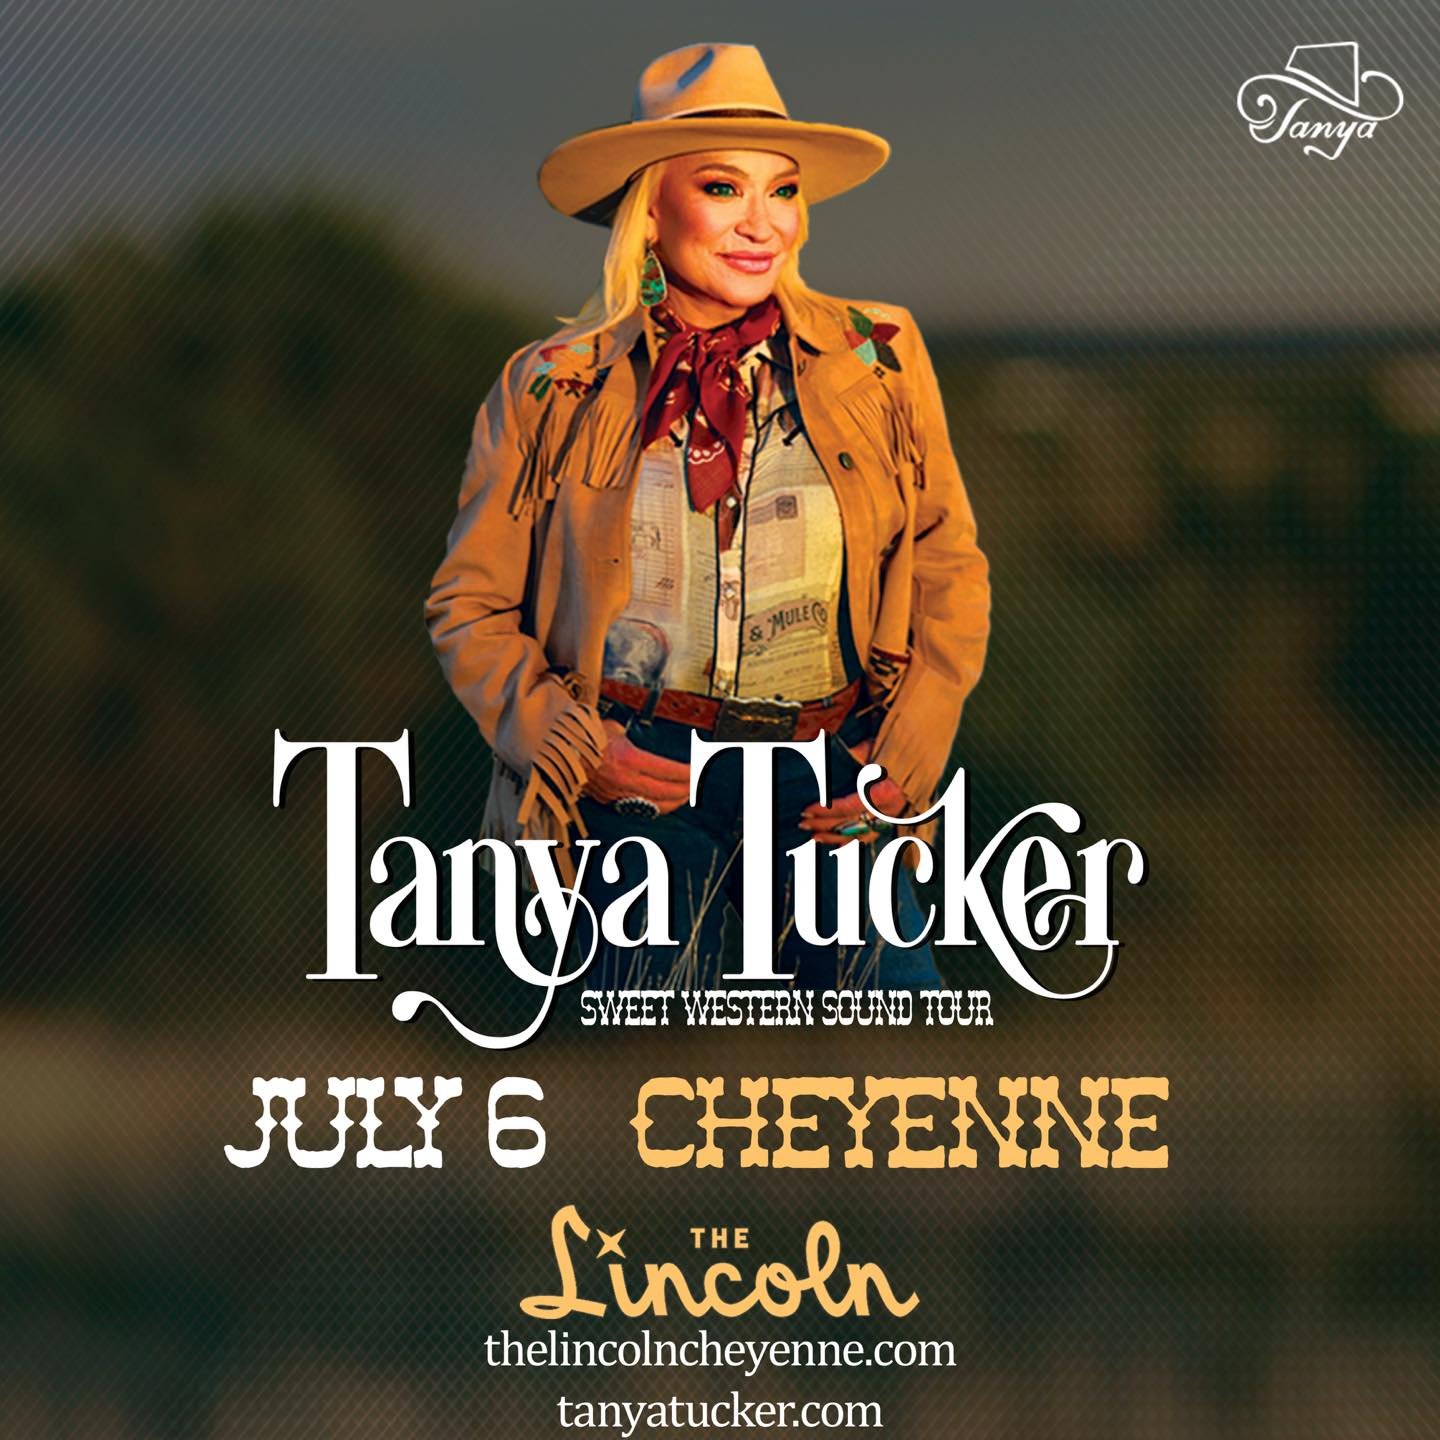 Tickets to see @thetanyatucker are now on sale for $45! Don&rsquo;t miss out on the queen of Country&mdash;grab your general admission tickets today! Find the ticket link in our bio. 🤠✨ #thelincolncheyenne #livemusic #thisisdowntowncheyenne